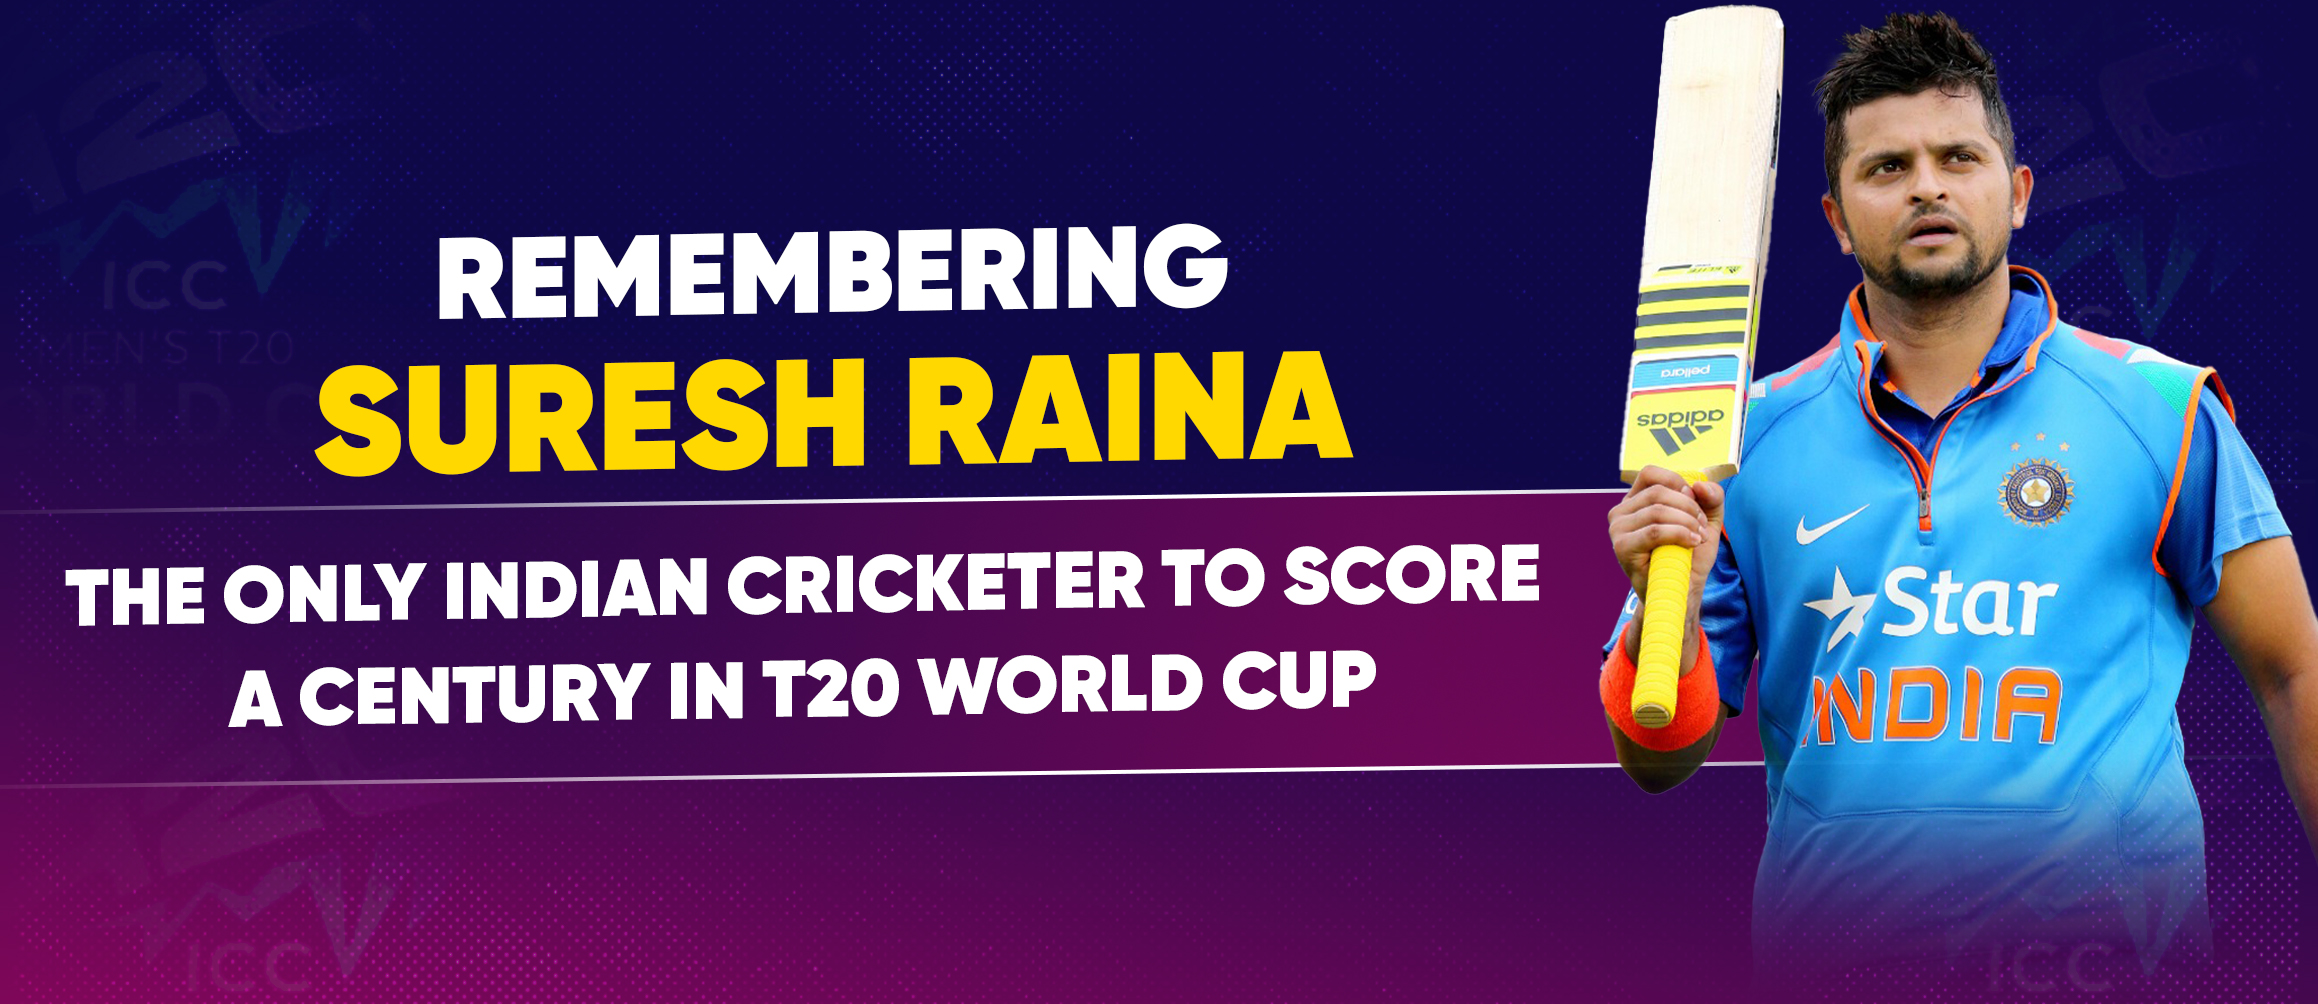 Remembering Suresh Raina – The Only Indian Cricketer to Score a Century in T20 World Cup